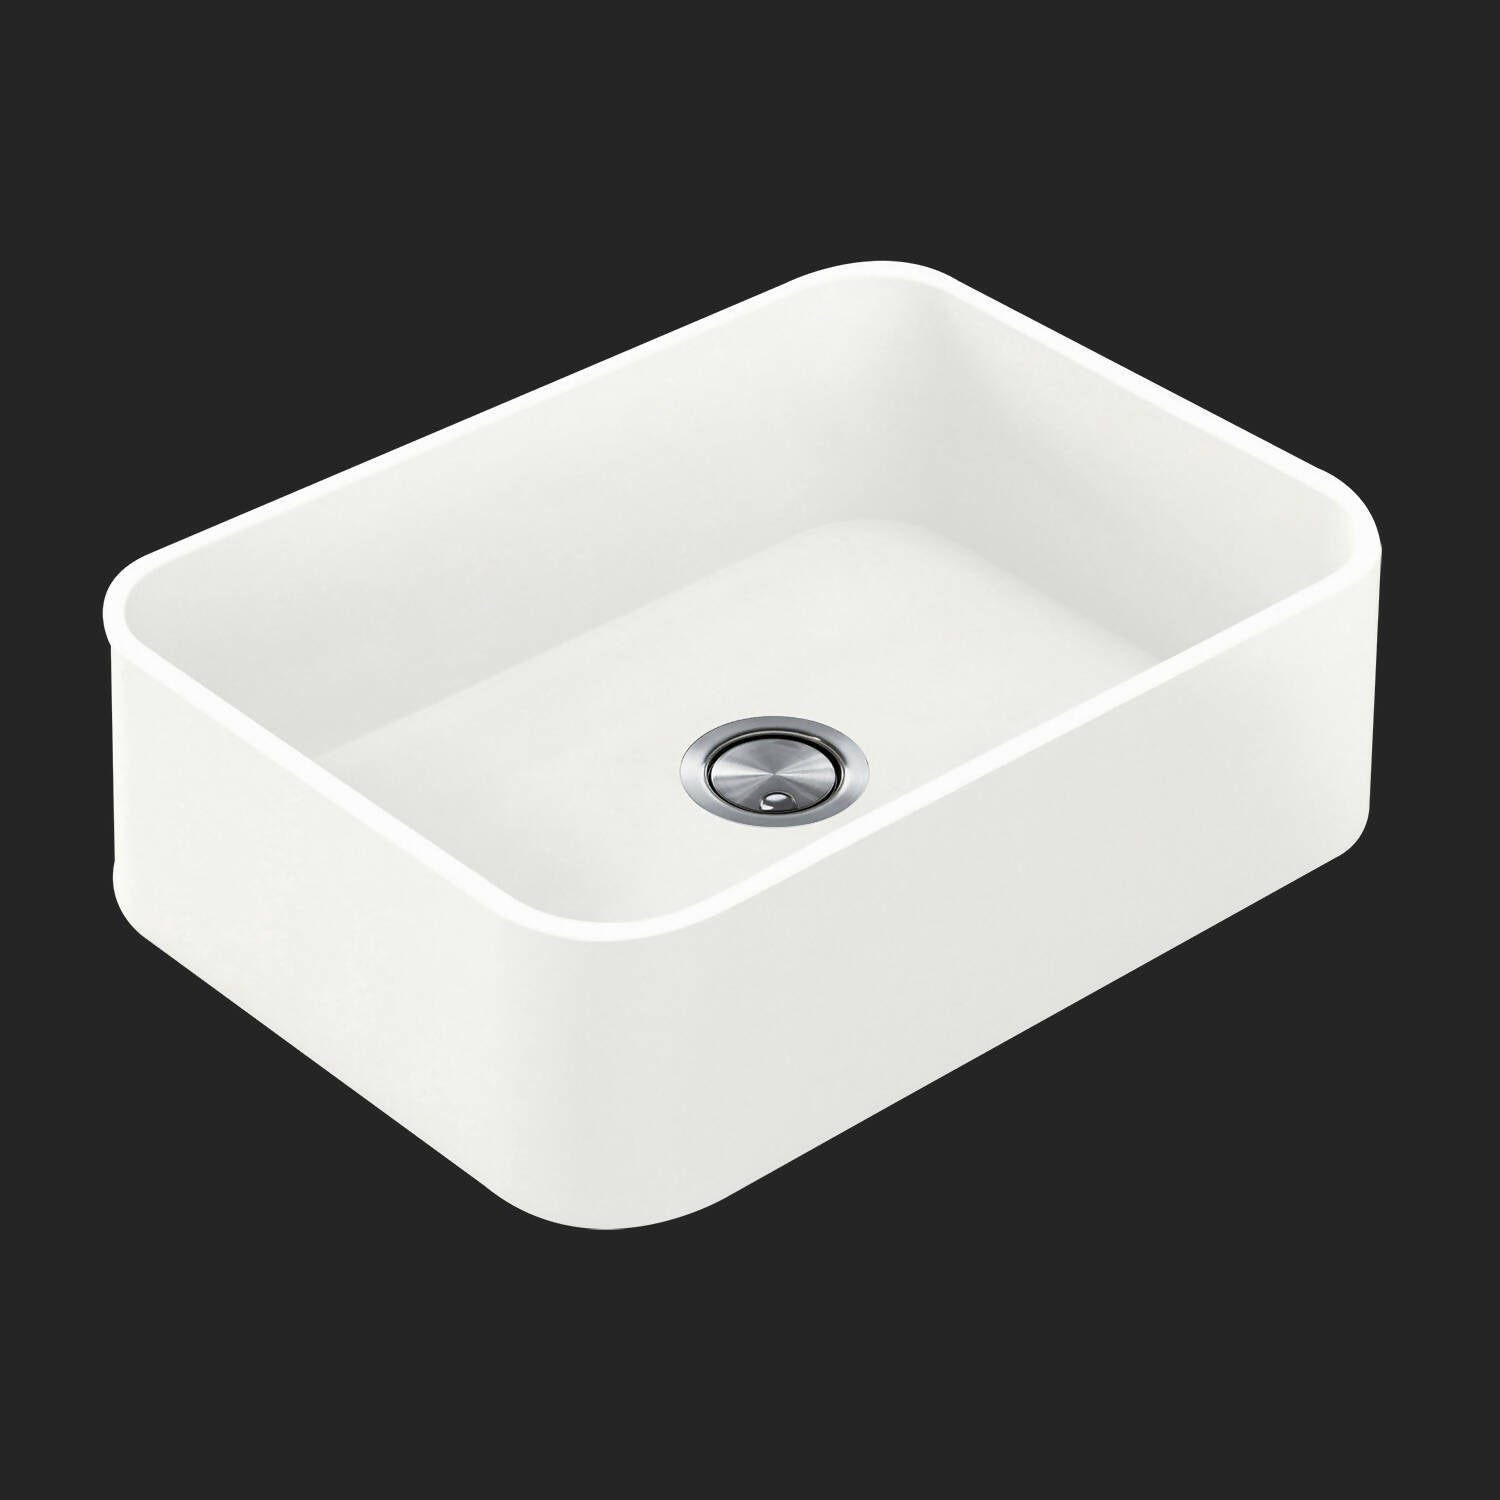 ICONIC WHITE INTEGRITY SINK,Stone Sink,Cosentino Sink,www.work-tops.com